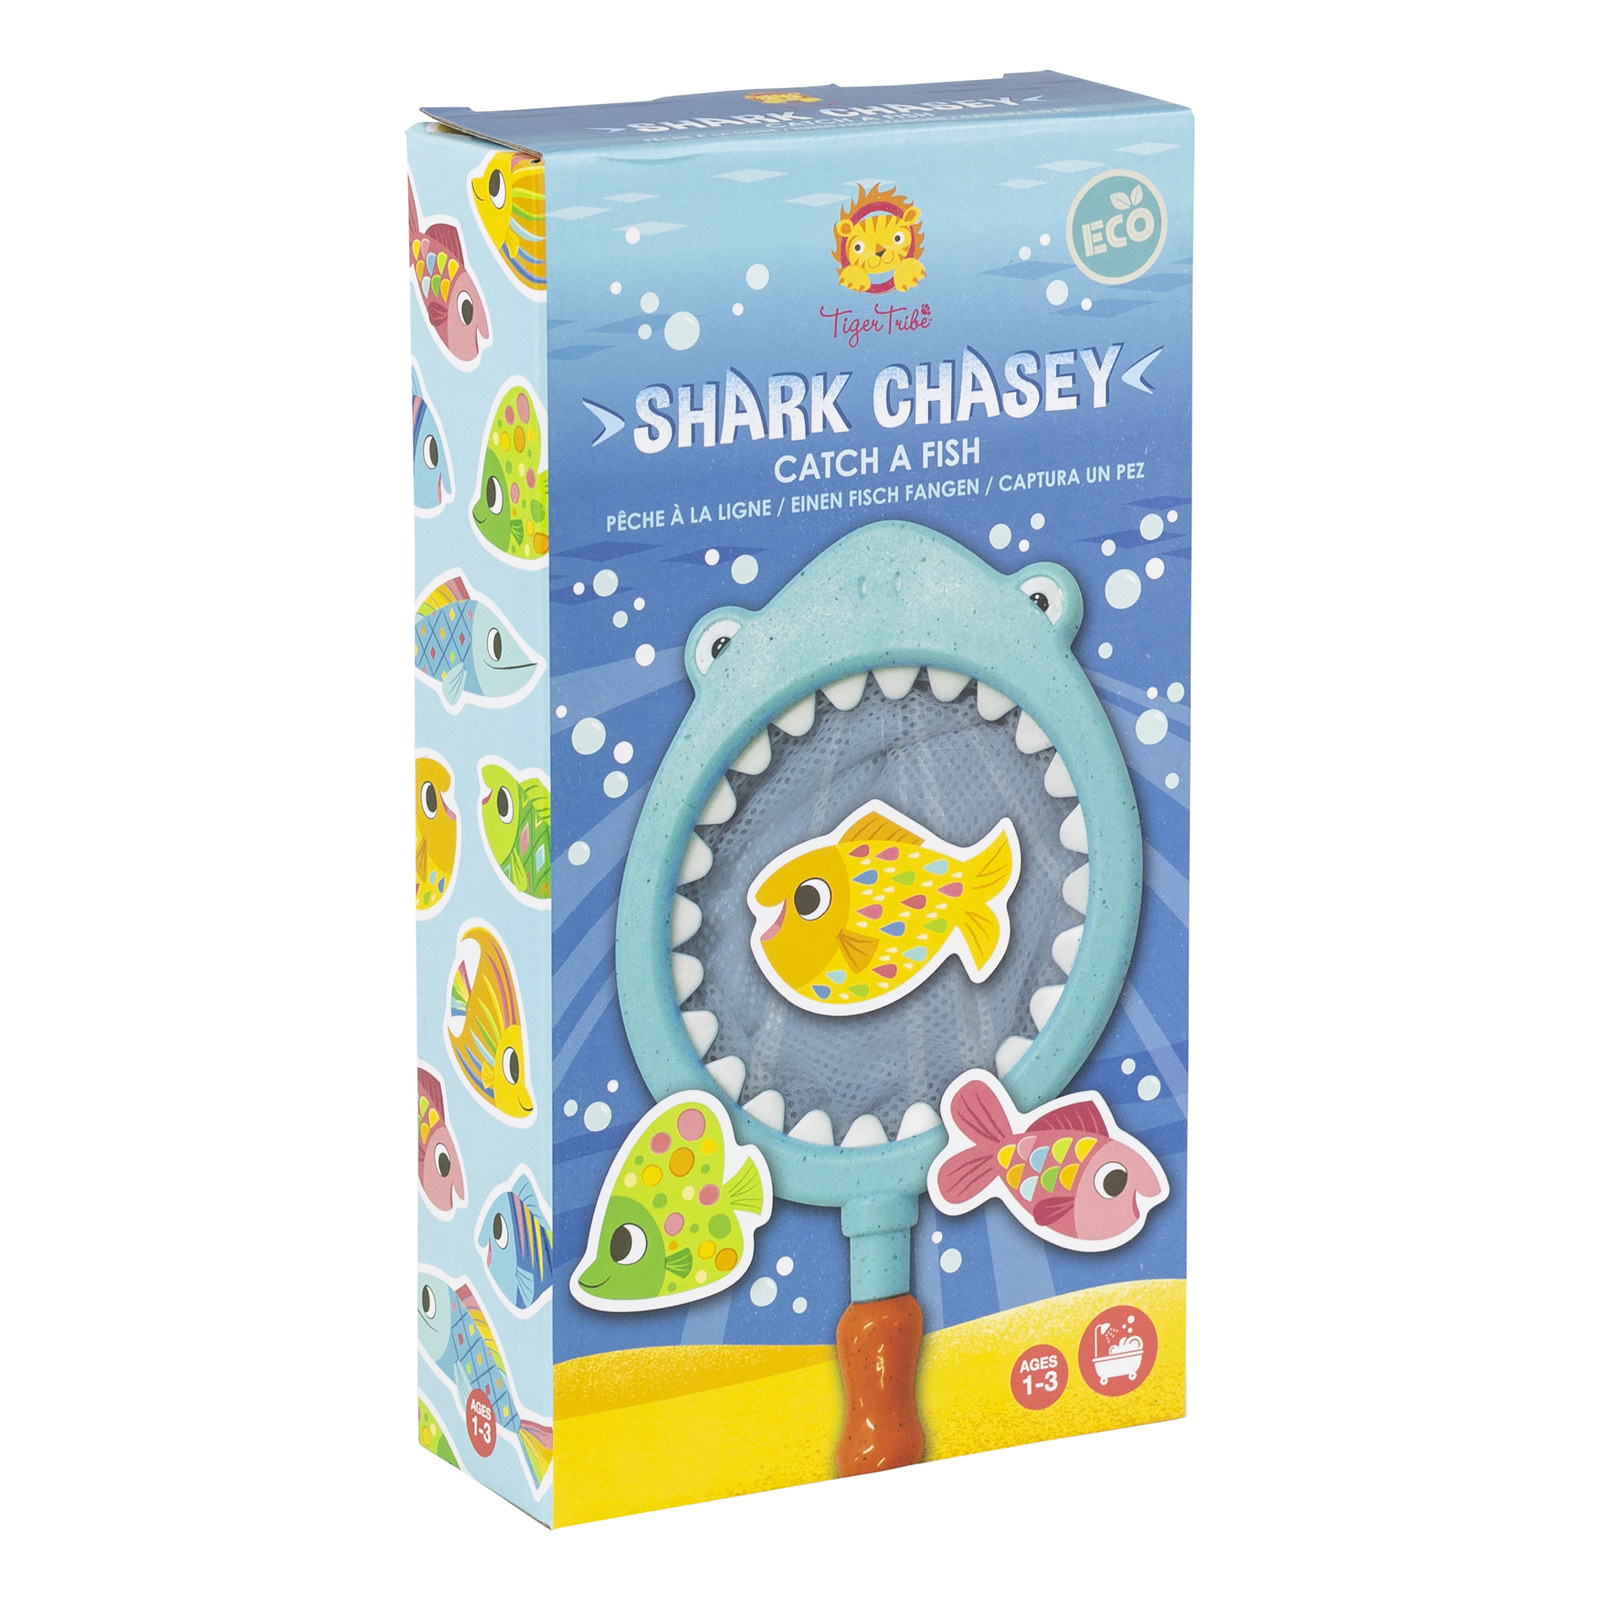 SHARK CHASEY - CATCH A FISH - ECO